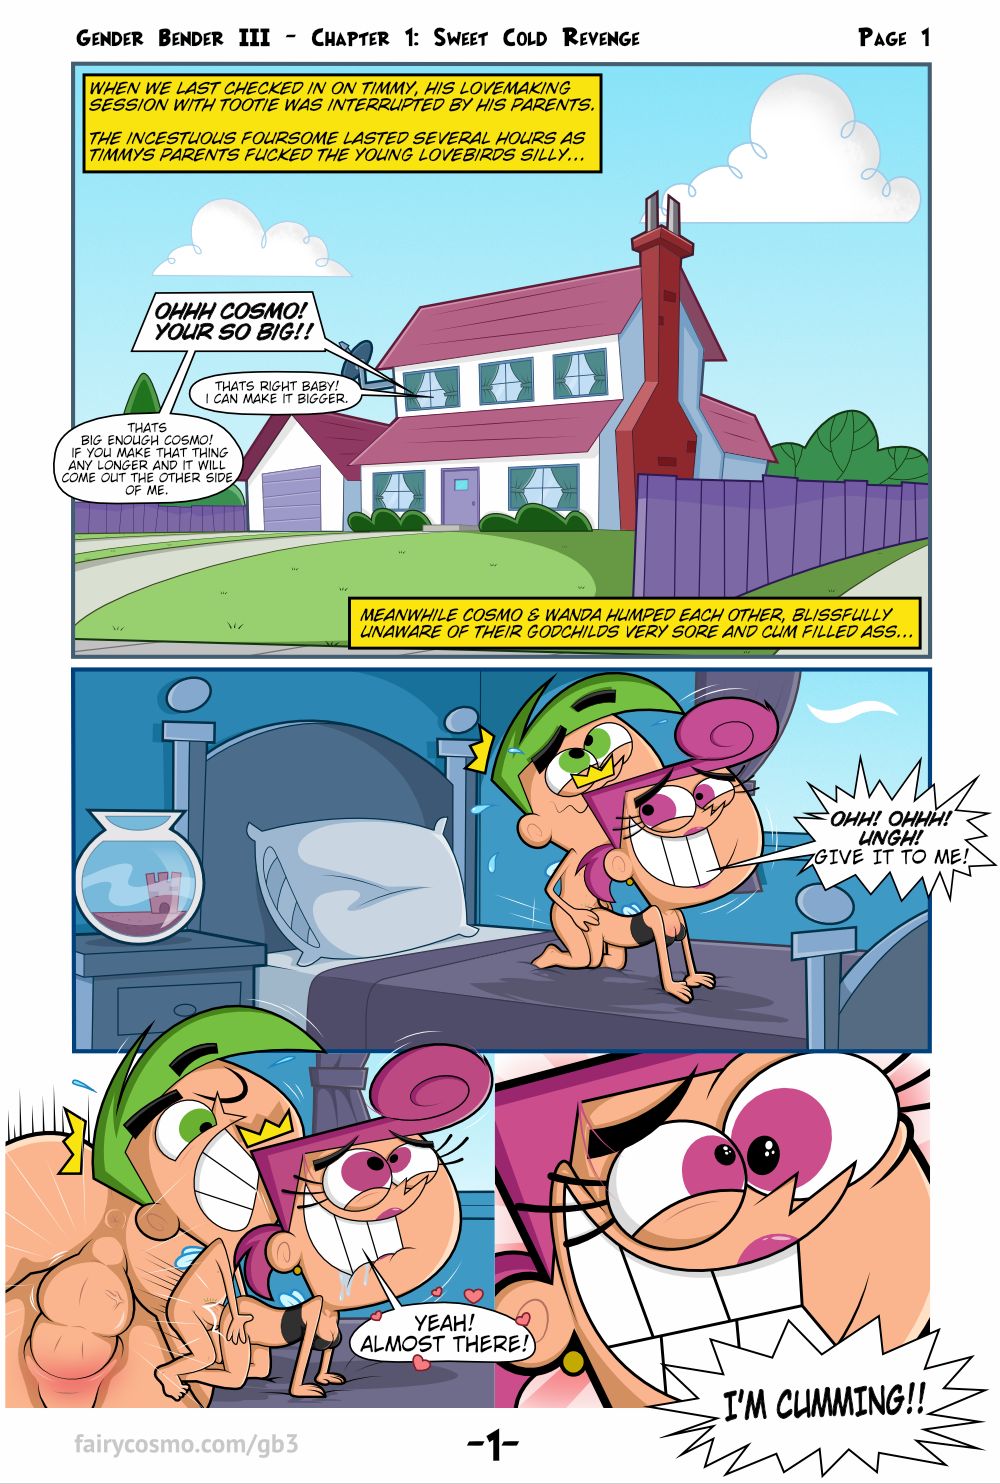 Fairly Oddparents Transformation Porn - Fairly OddParents- Gender Bender III (Fairycosmo) Â» Porn Comics Galleries